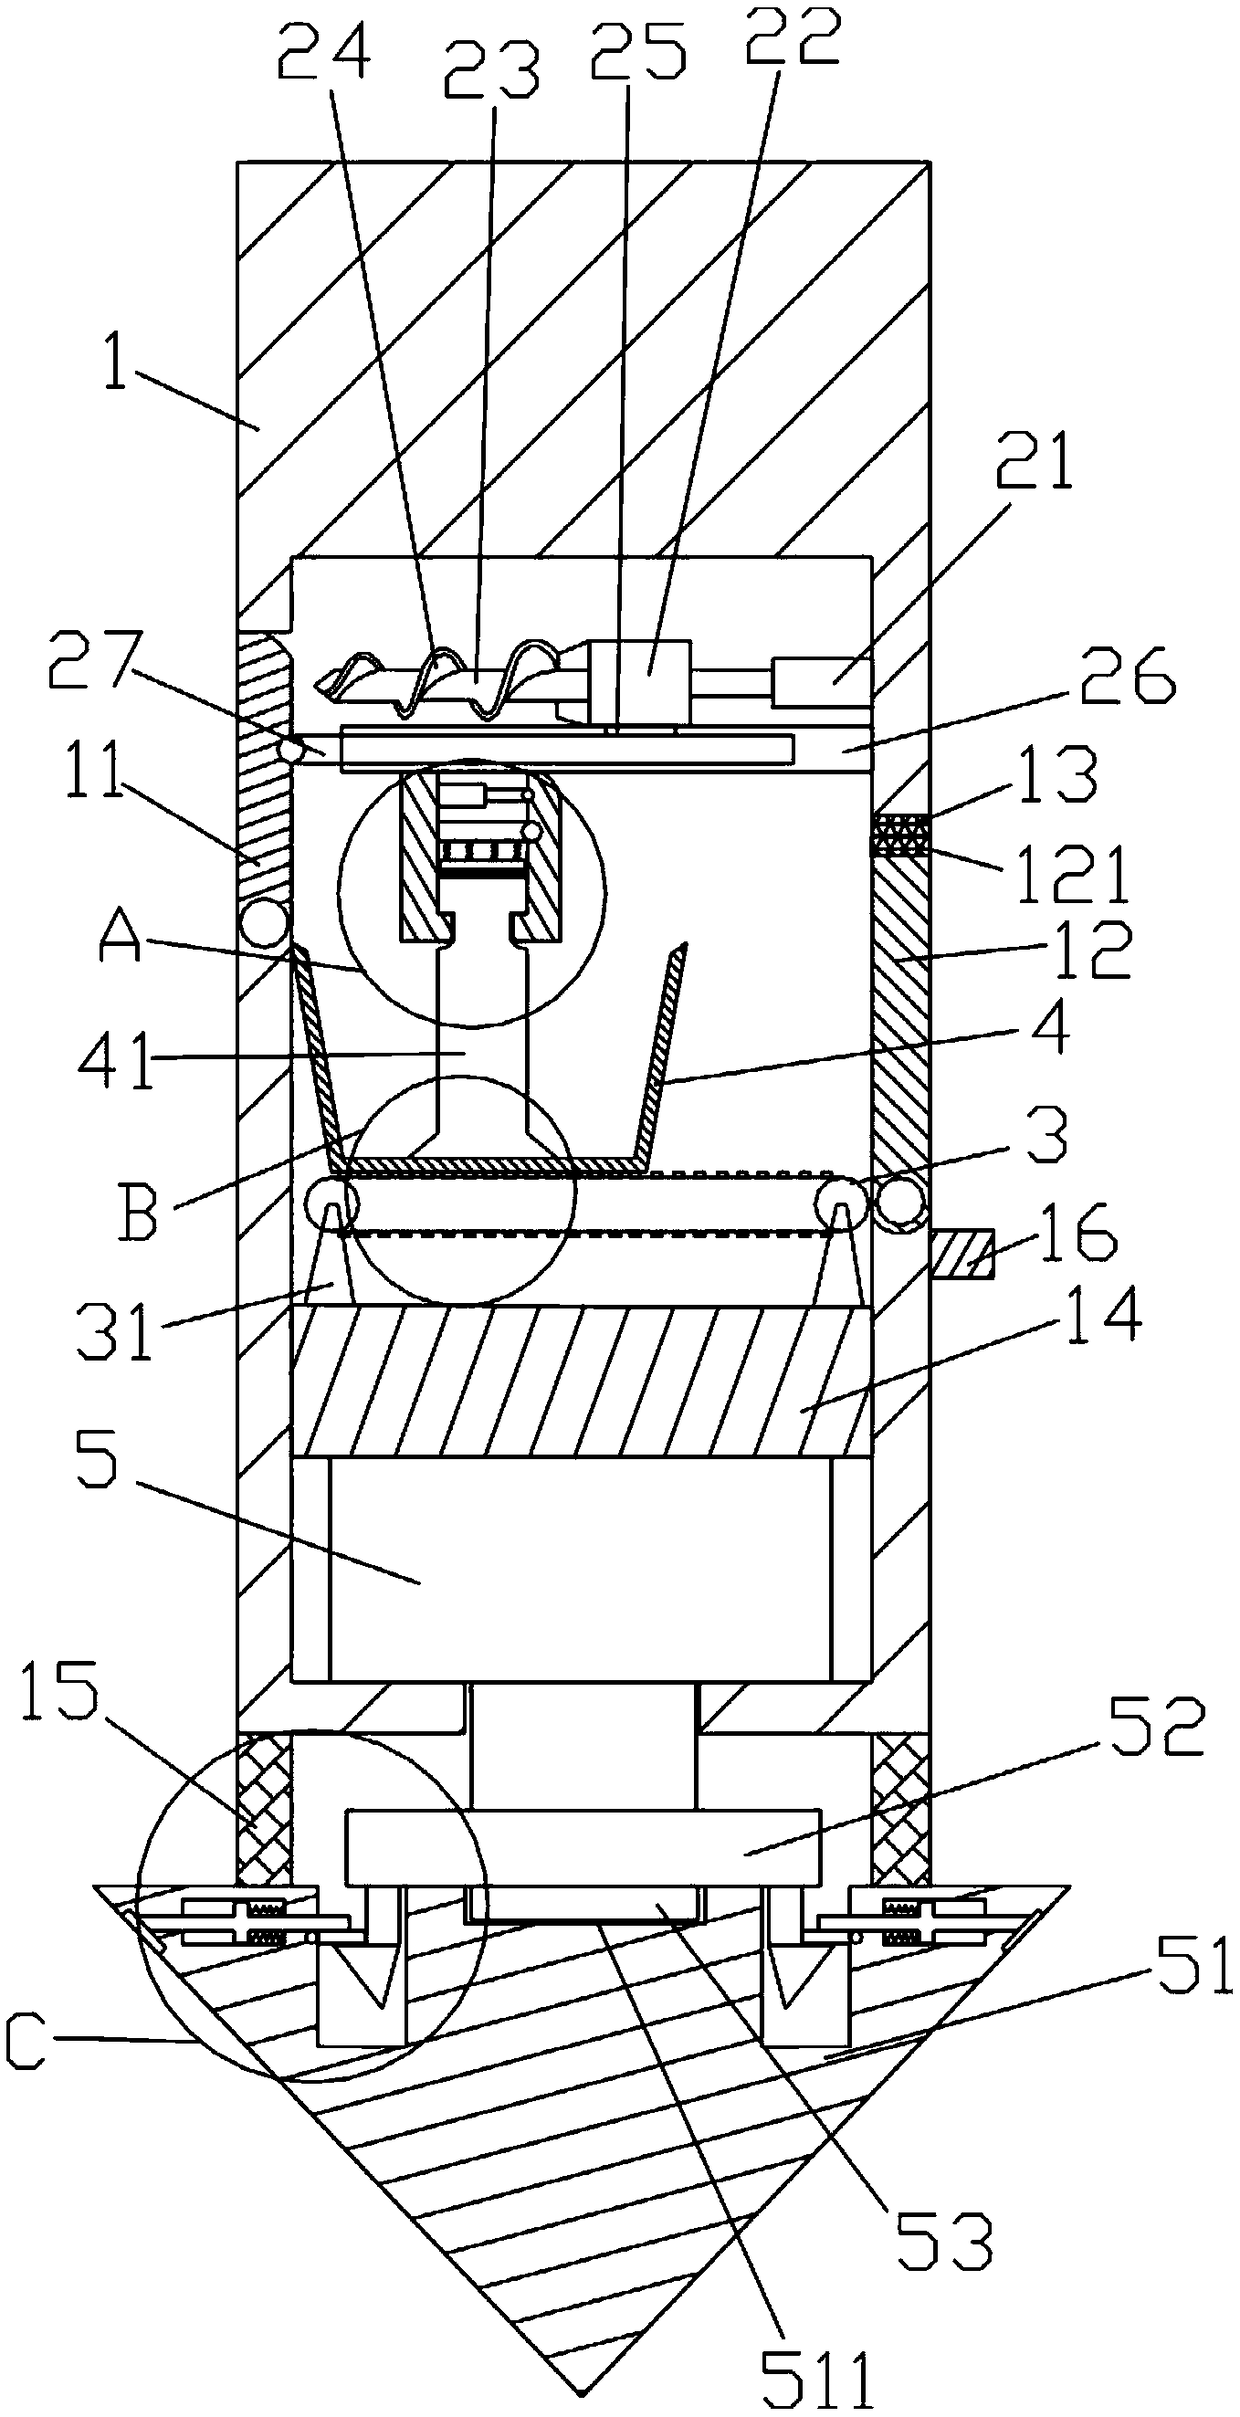 Soil detection device convenient for assembling and disassembling drill bit